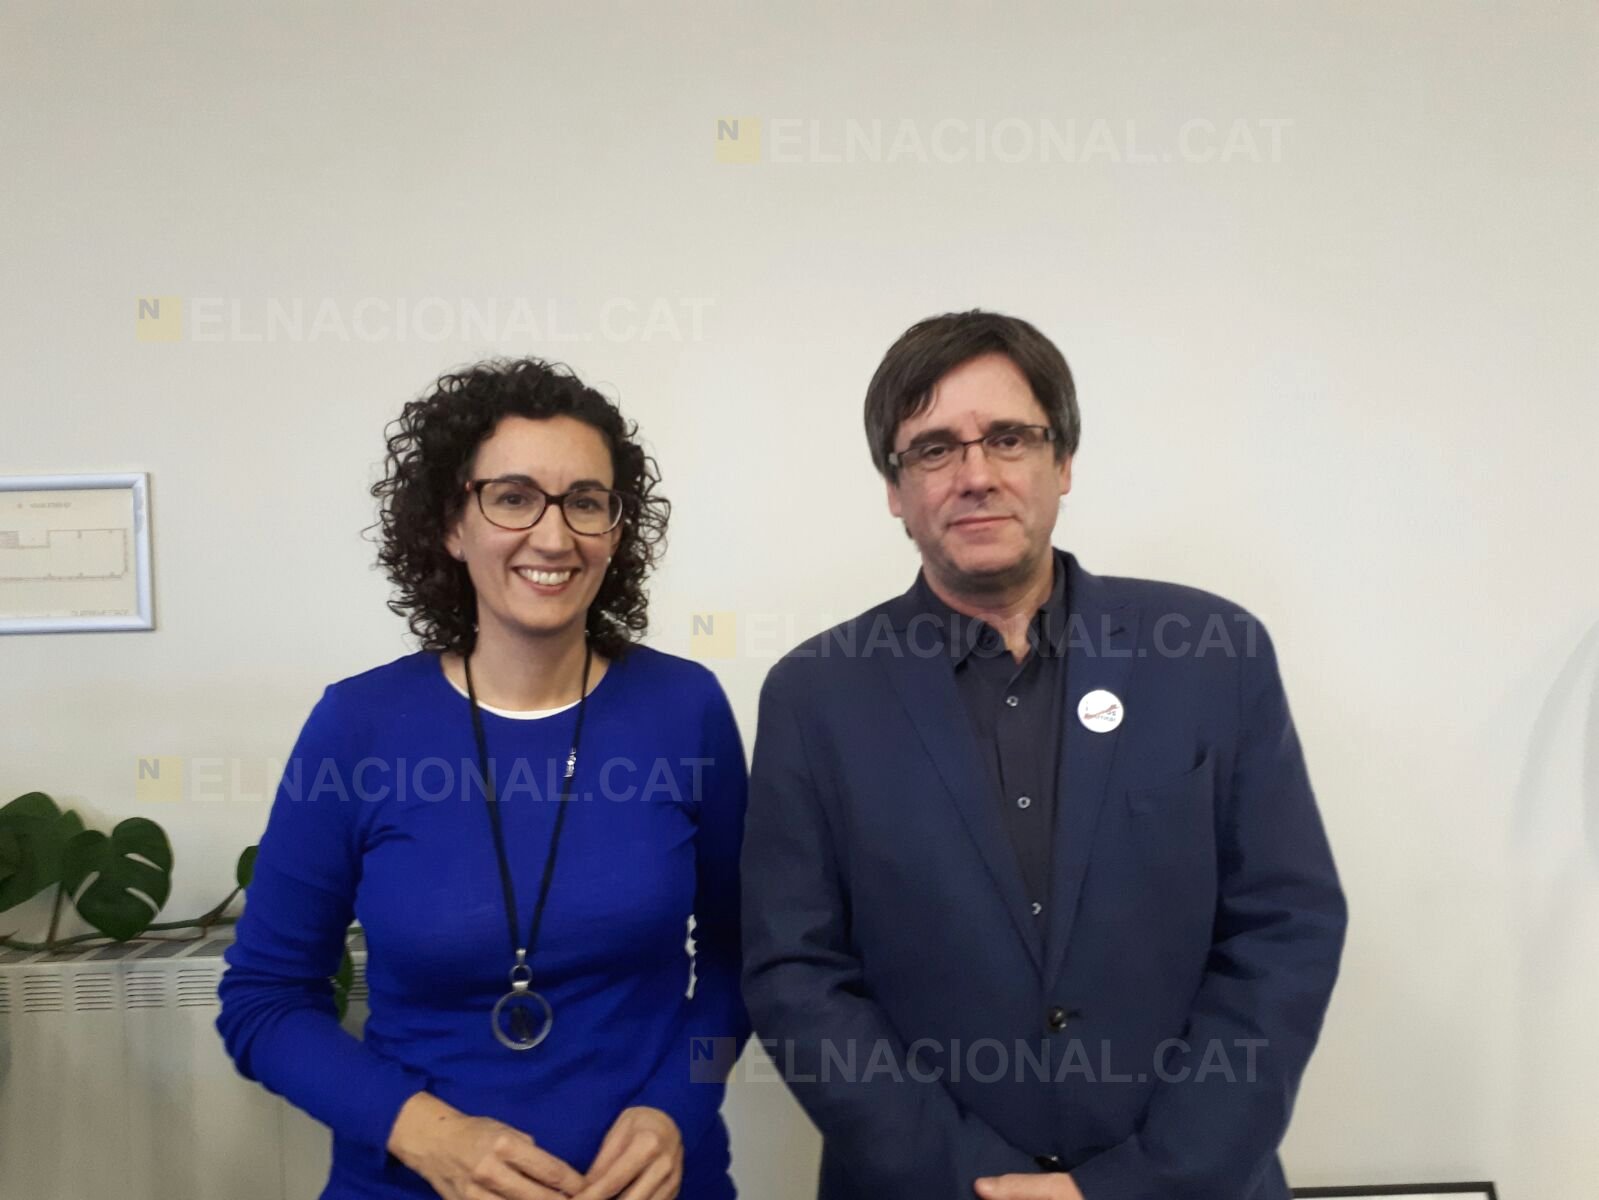 ERC leader Rovira travels to Brussels to meet Puigdemont and the ministers